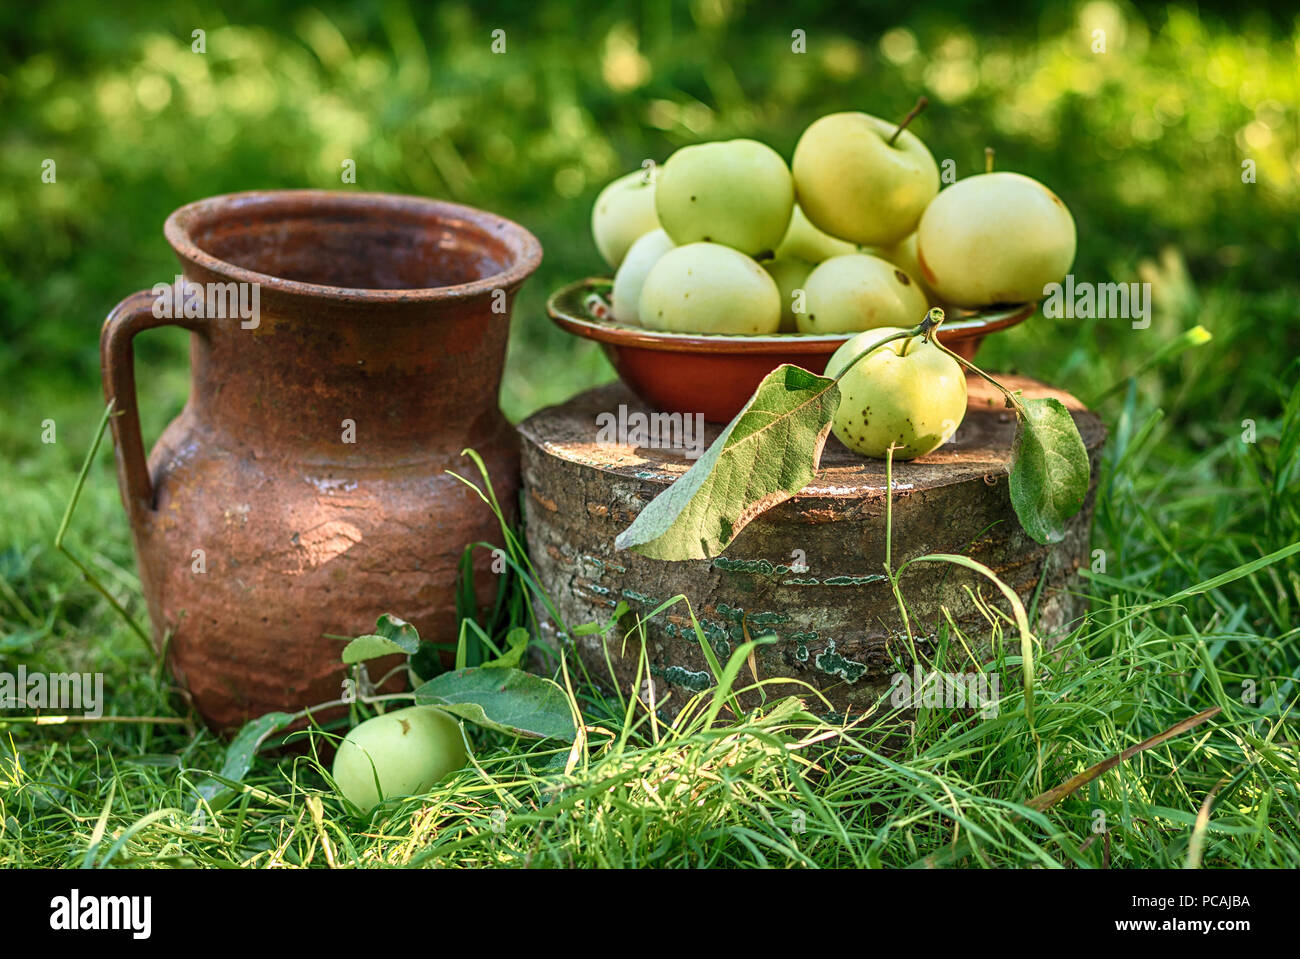 Apples with pitcher, still life. Stock Photo